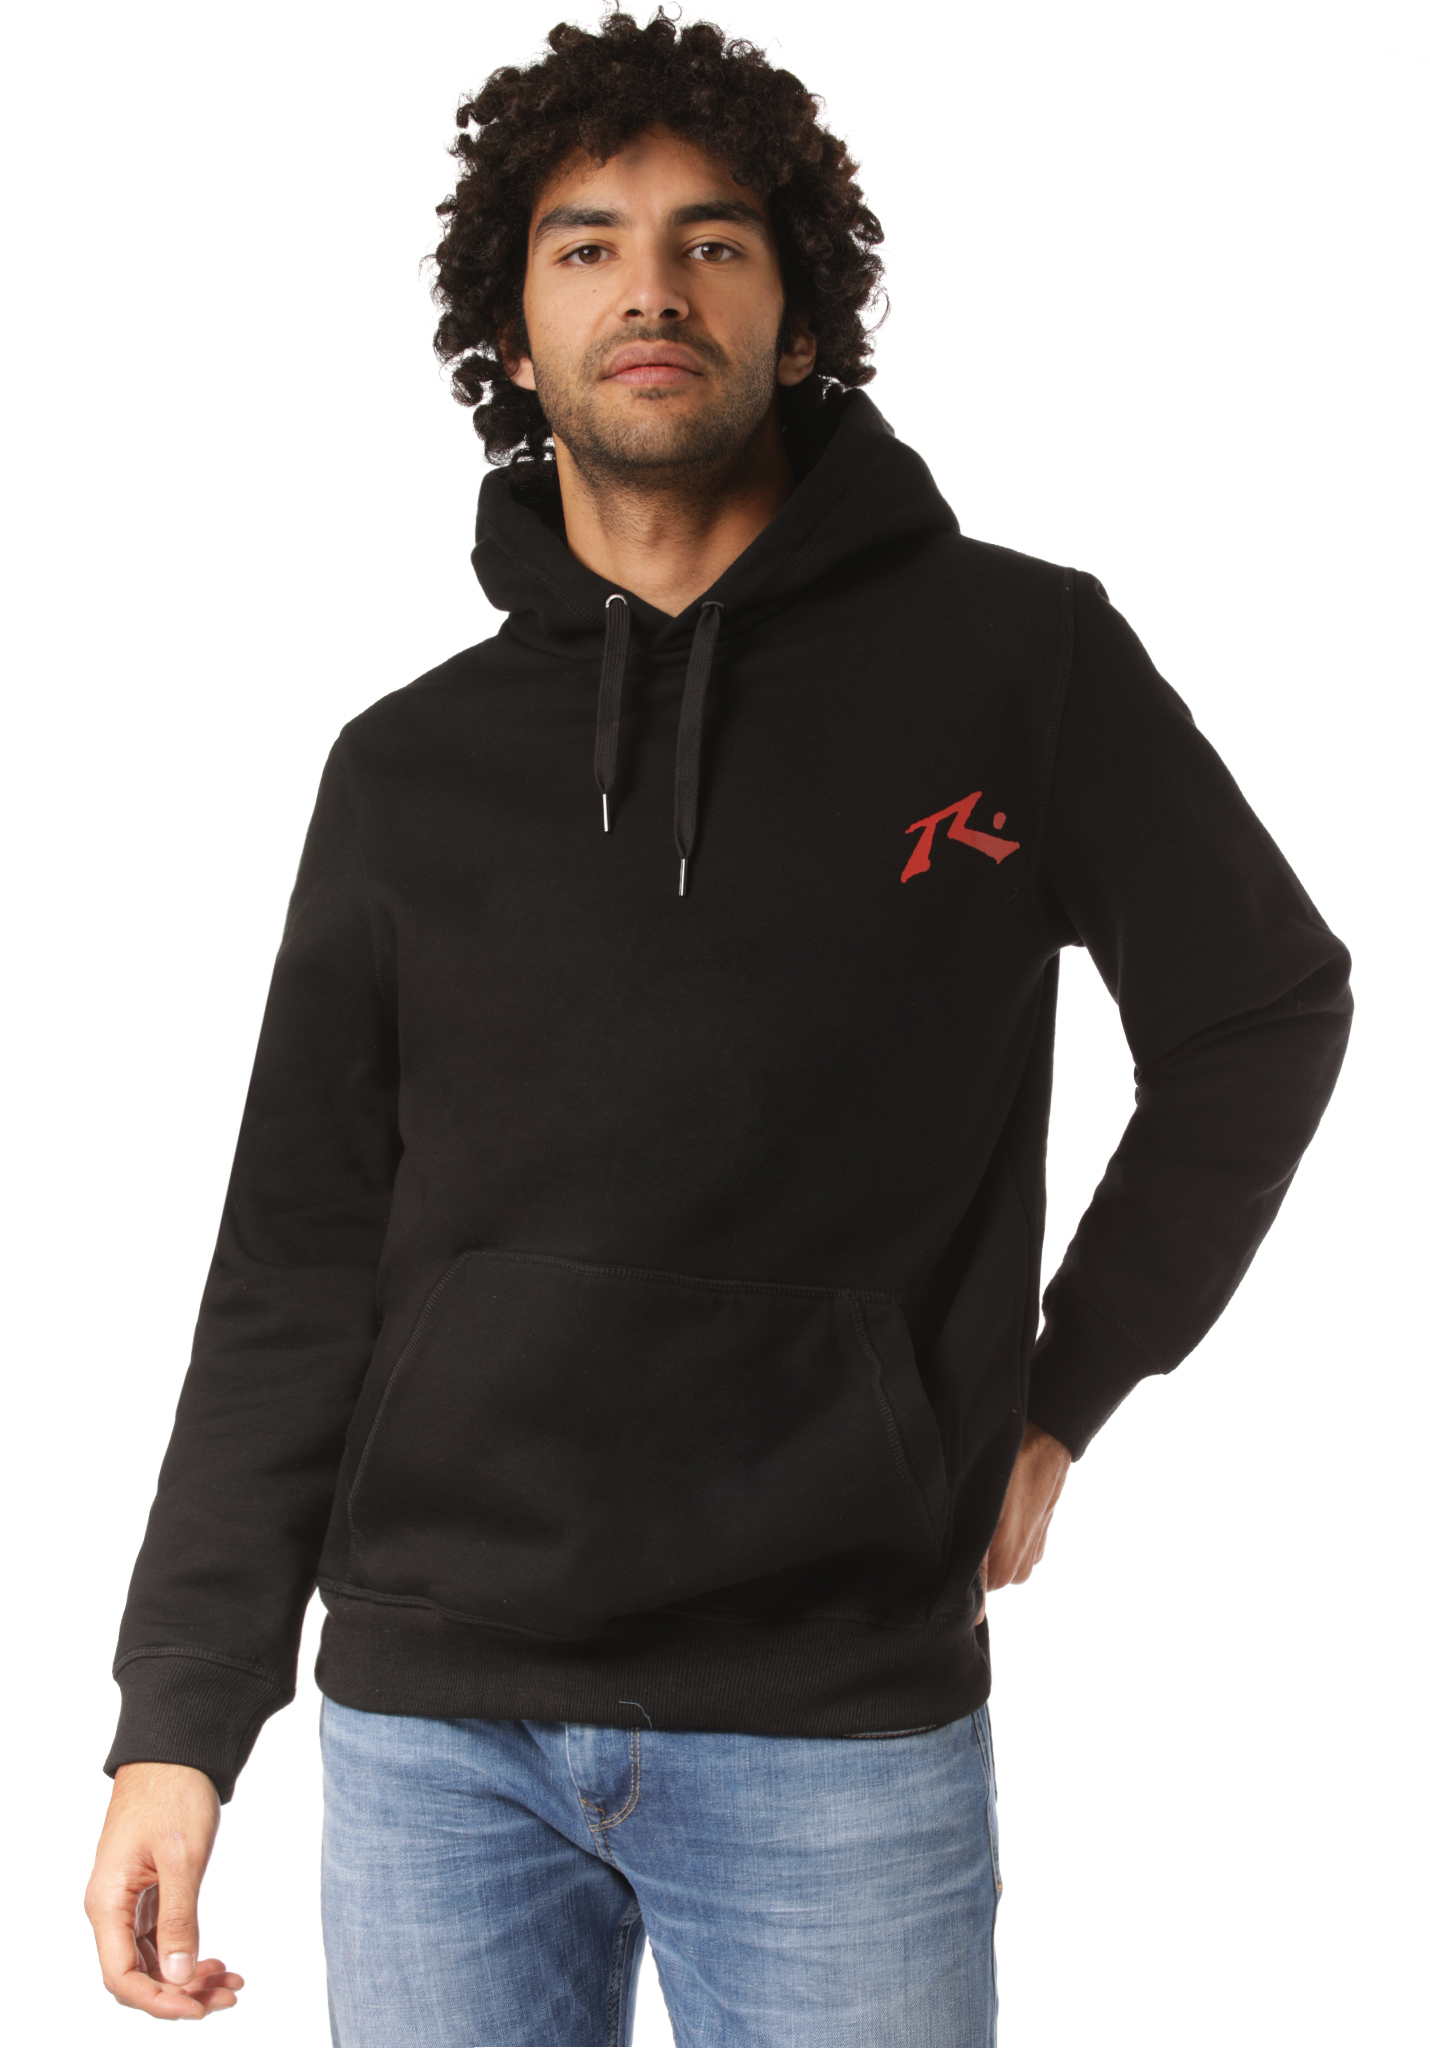 Rusty Competition Hoodie schwarz rot L